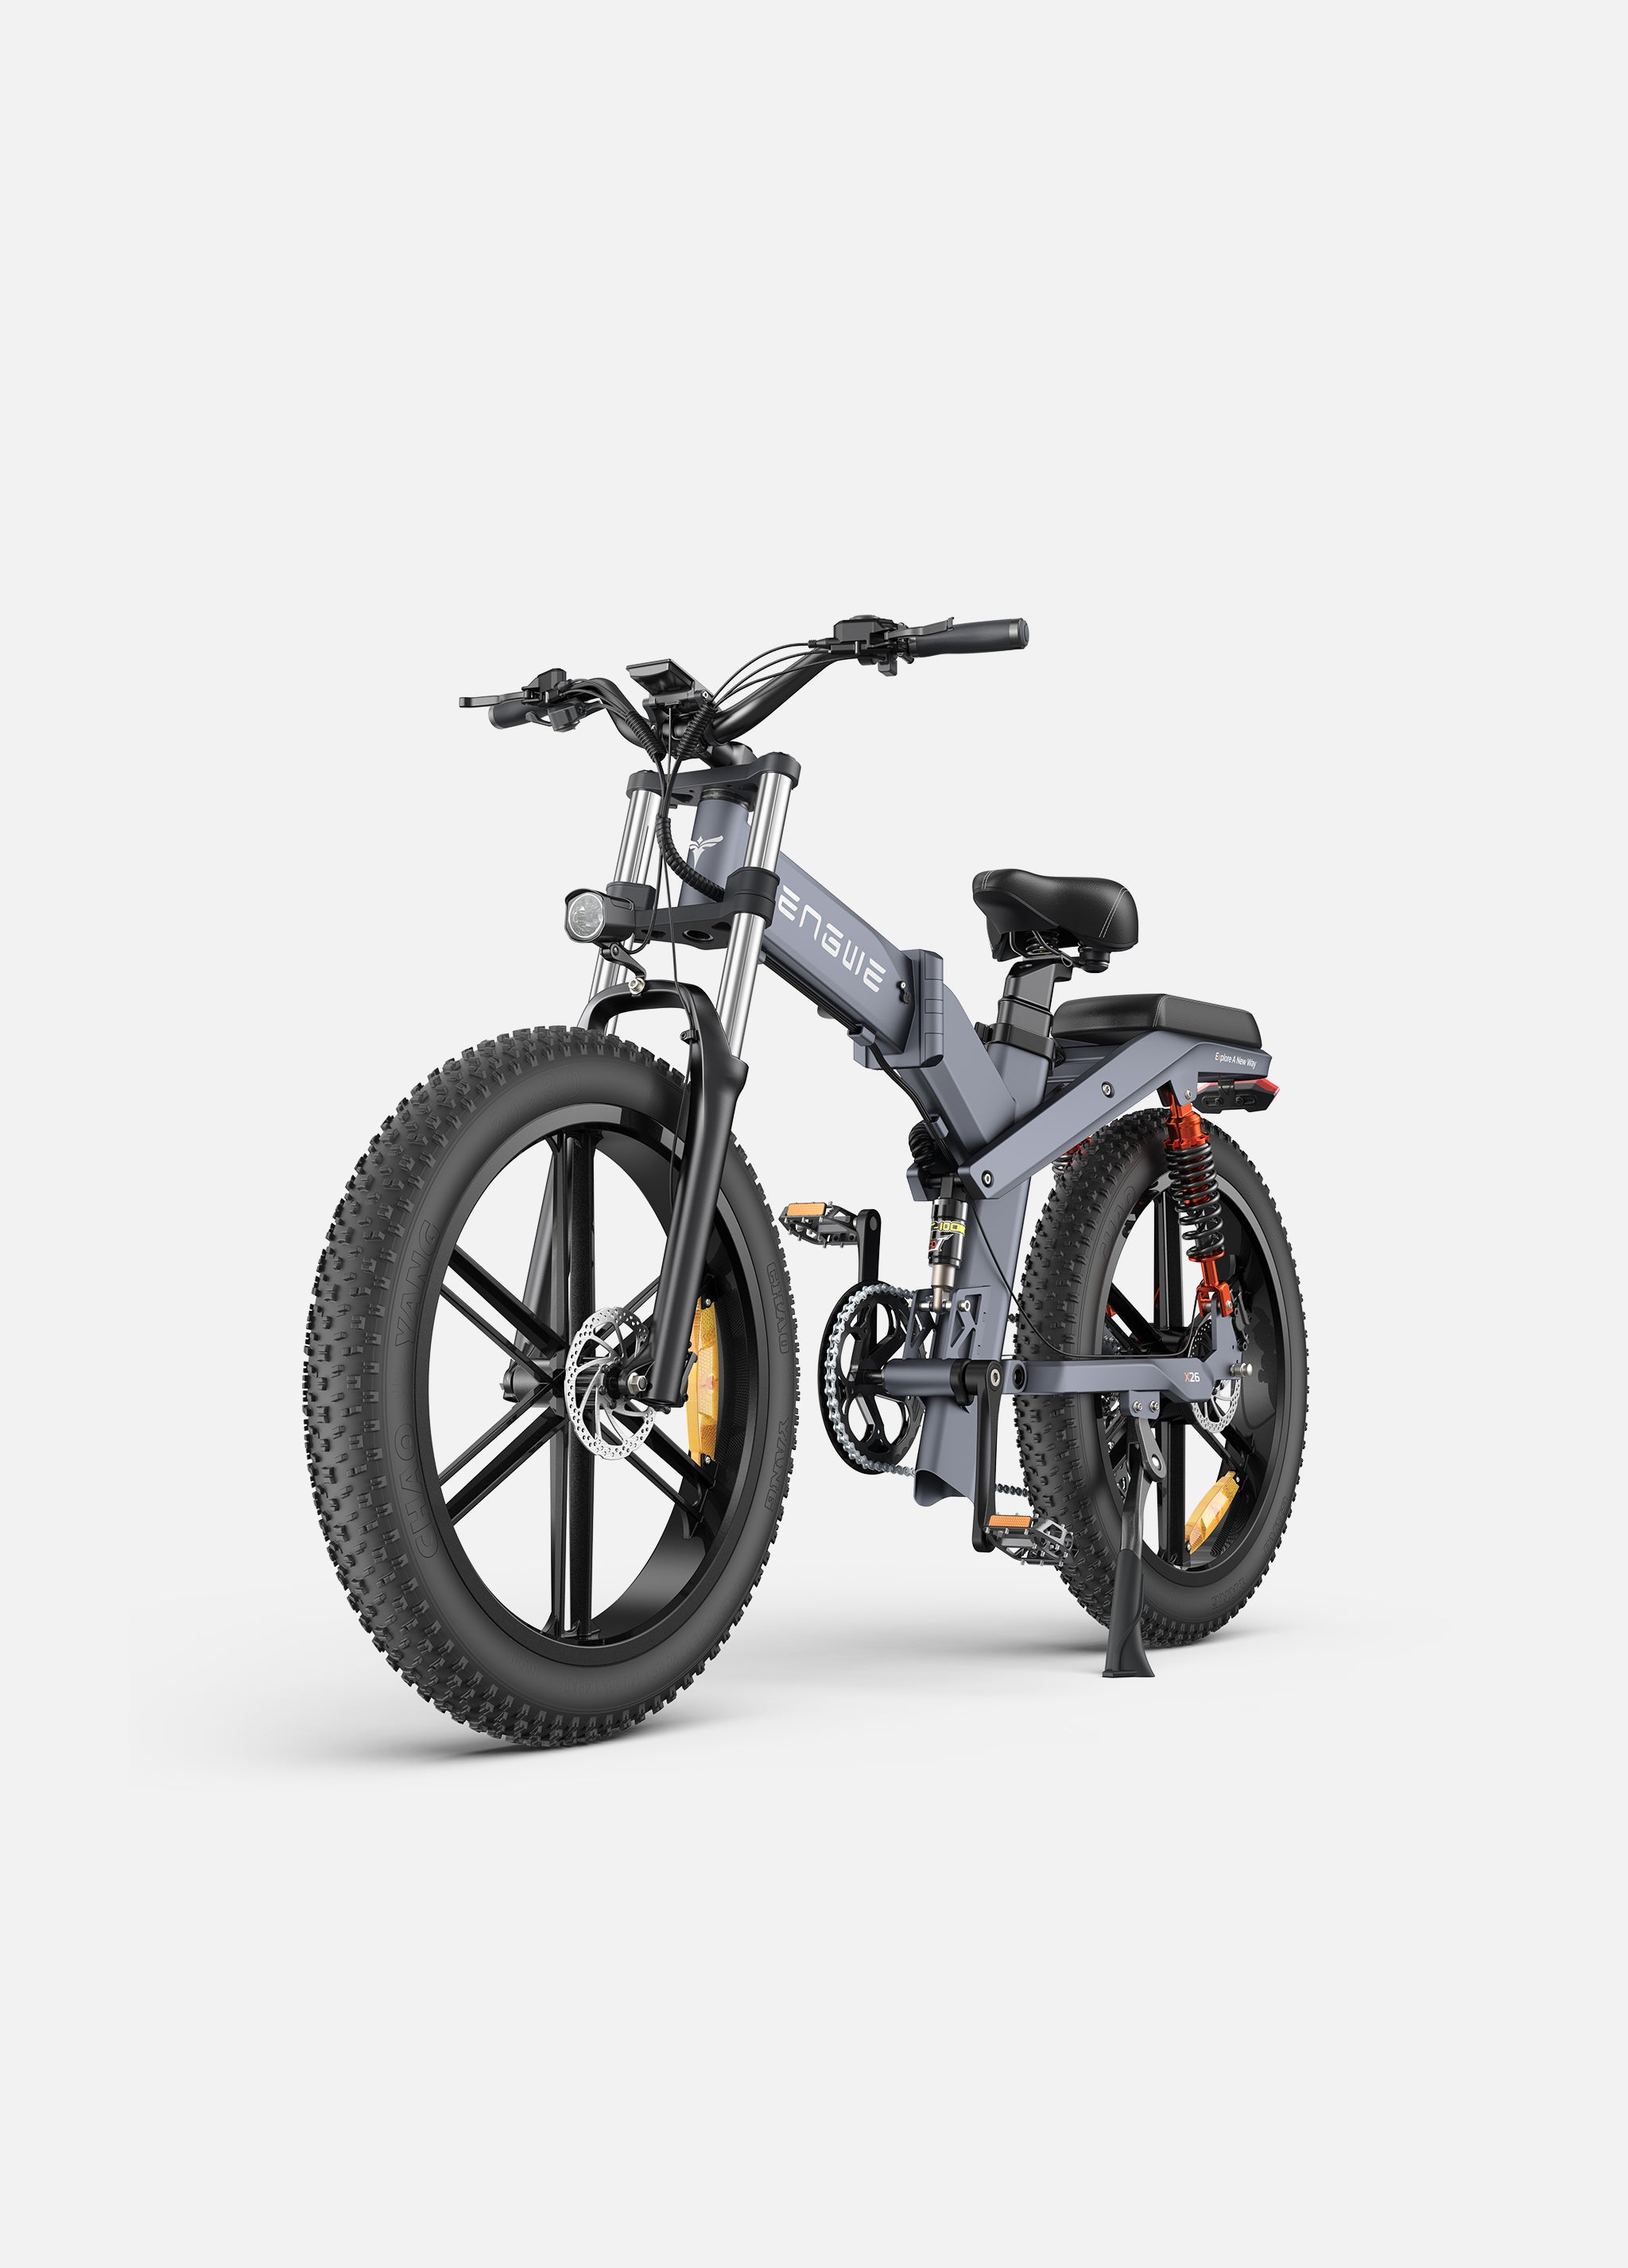  ENGWE M20 Electric Bike for Adults-750W 4.0 * 20 Fat Tire  Offroad Cruiser E Motorcycle 28MPH 94Miles Long Range for 48V 26Ah-Dual  Battery,Black : Sports & Outdoors